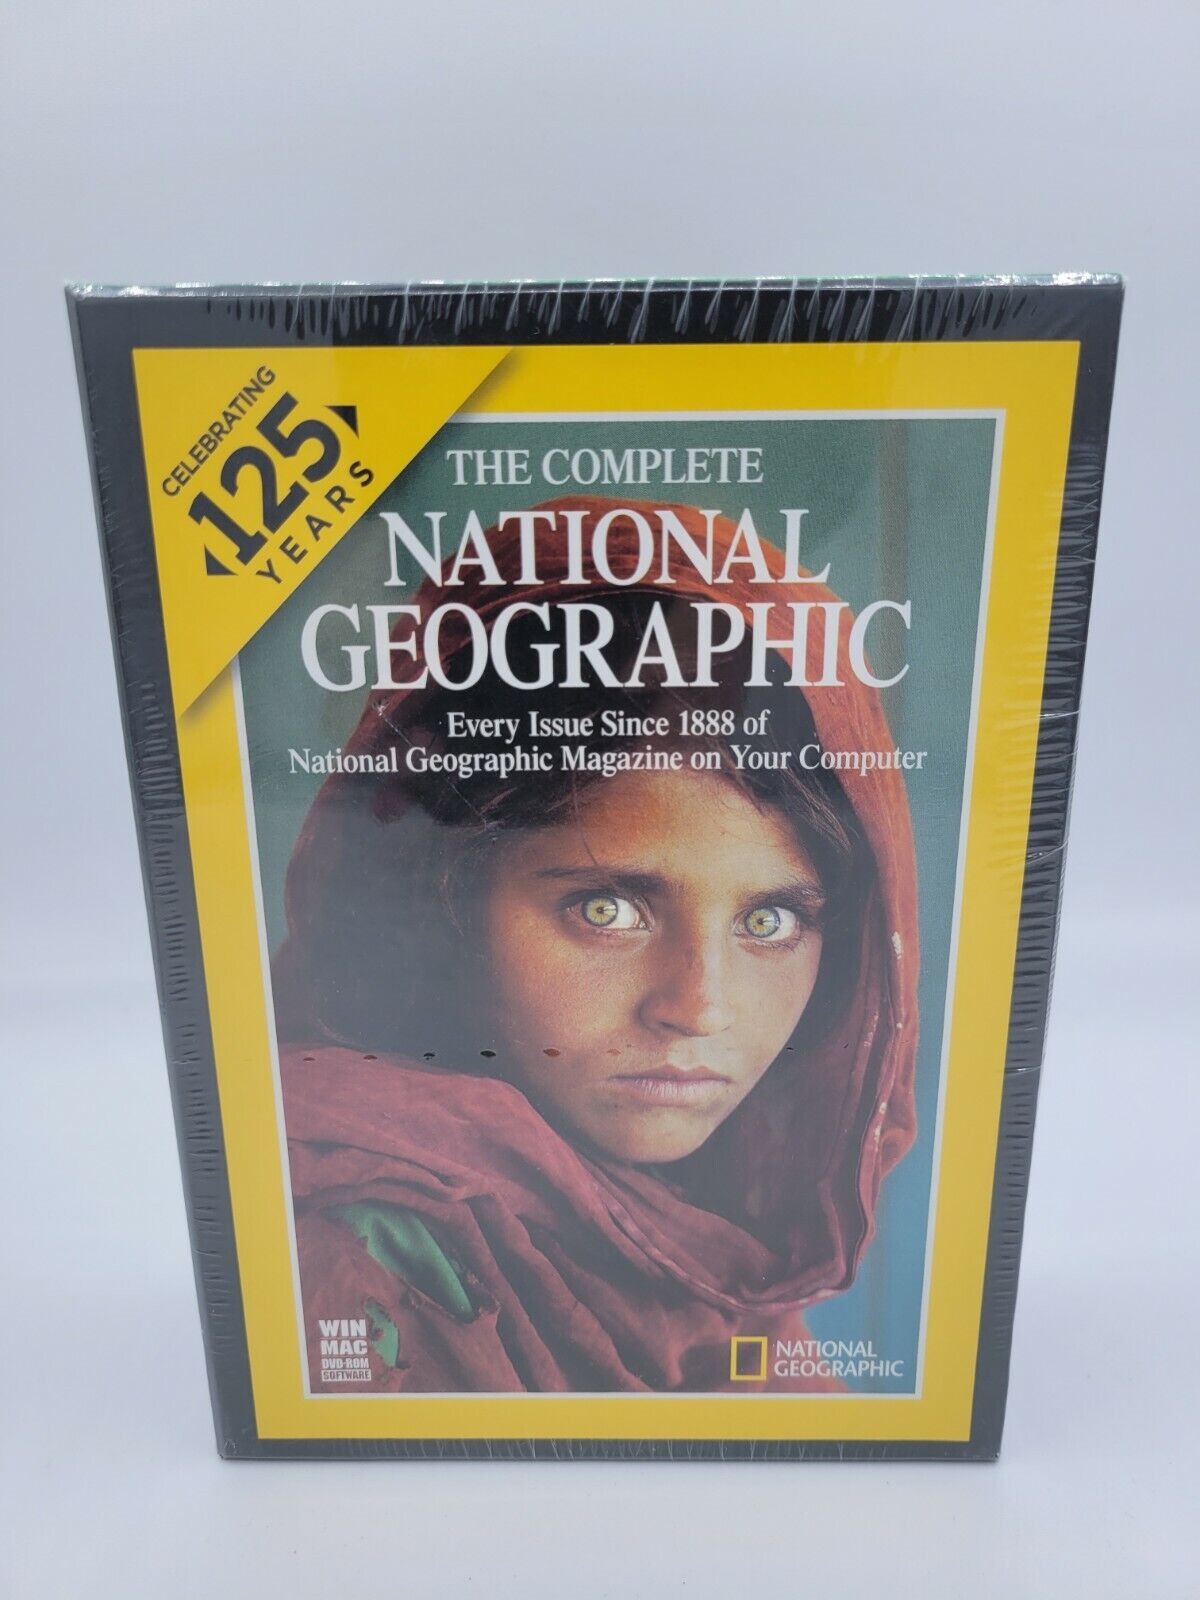 The Complete National Geographic (7 DVD-ROM Win Mac) Every Issue Since 1888 NEW